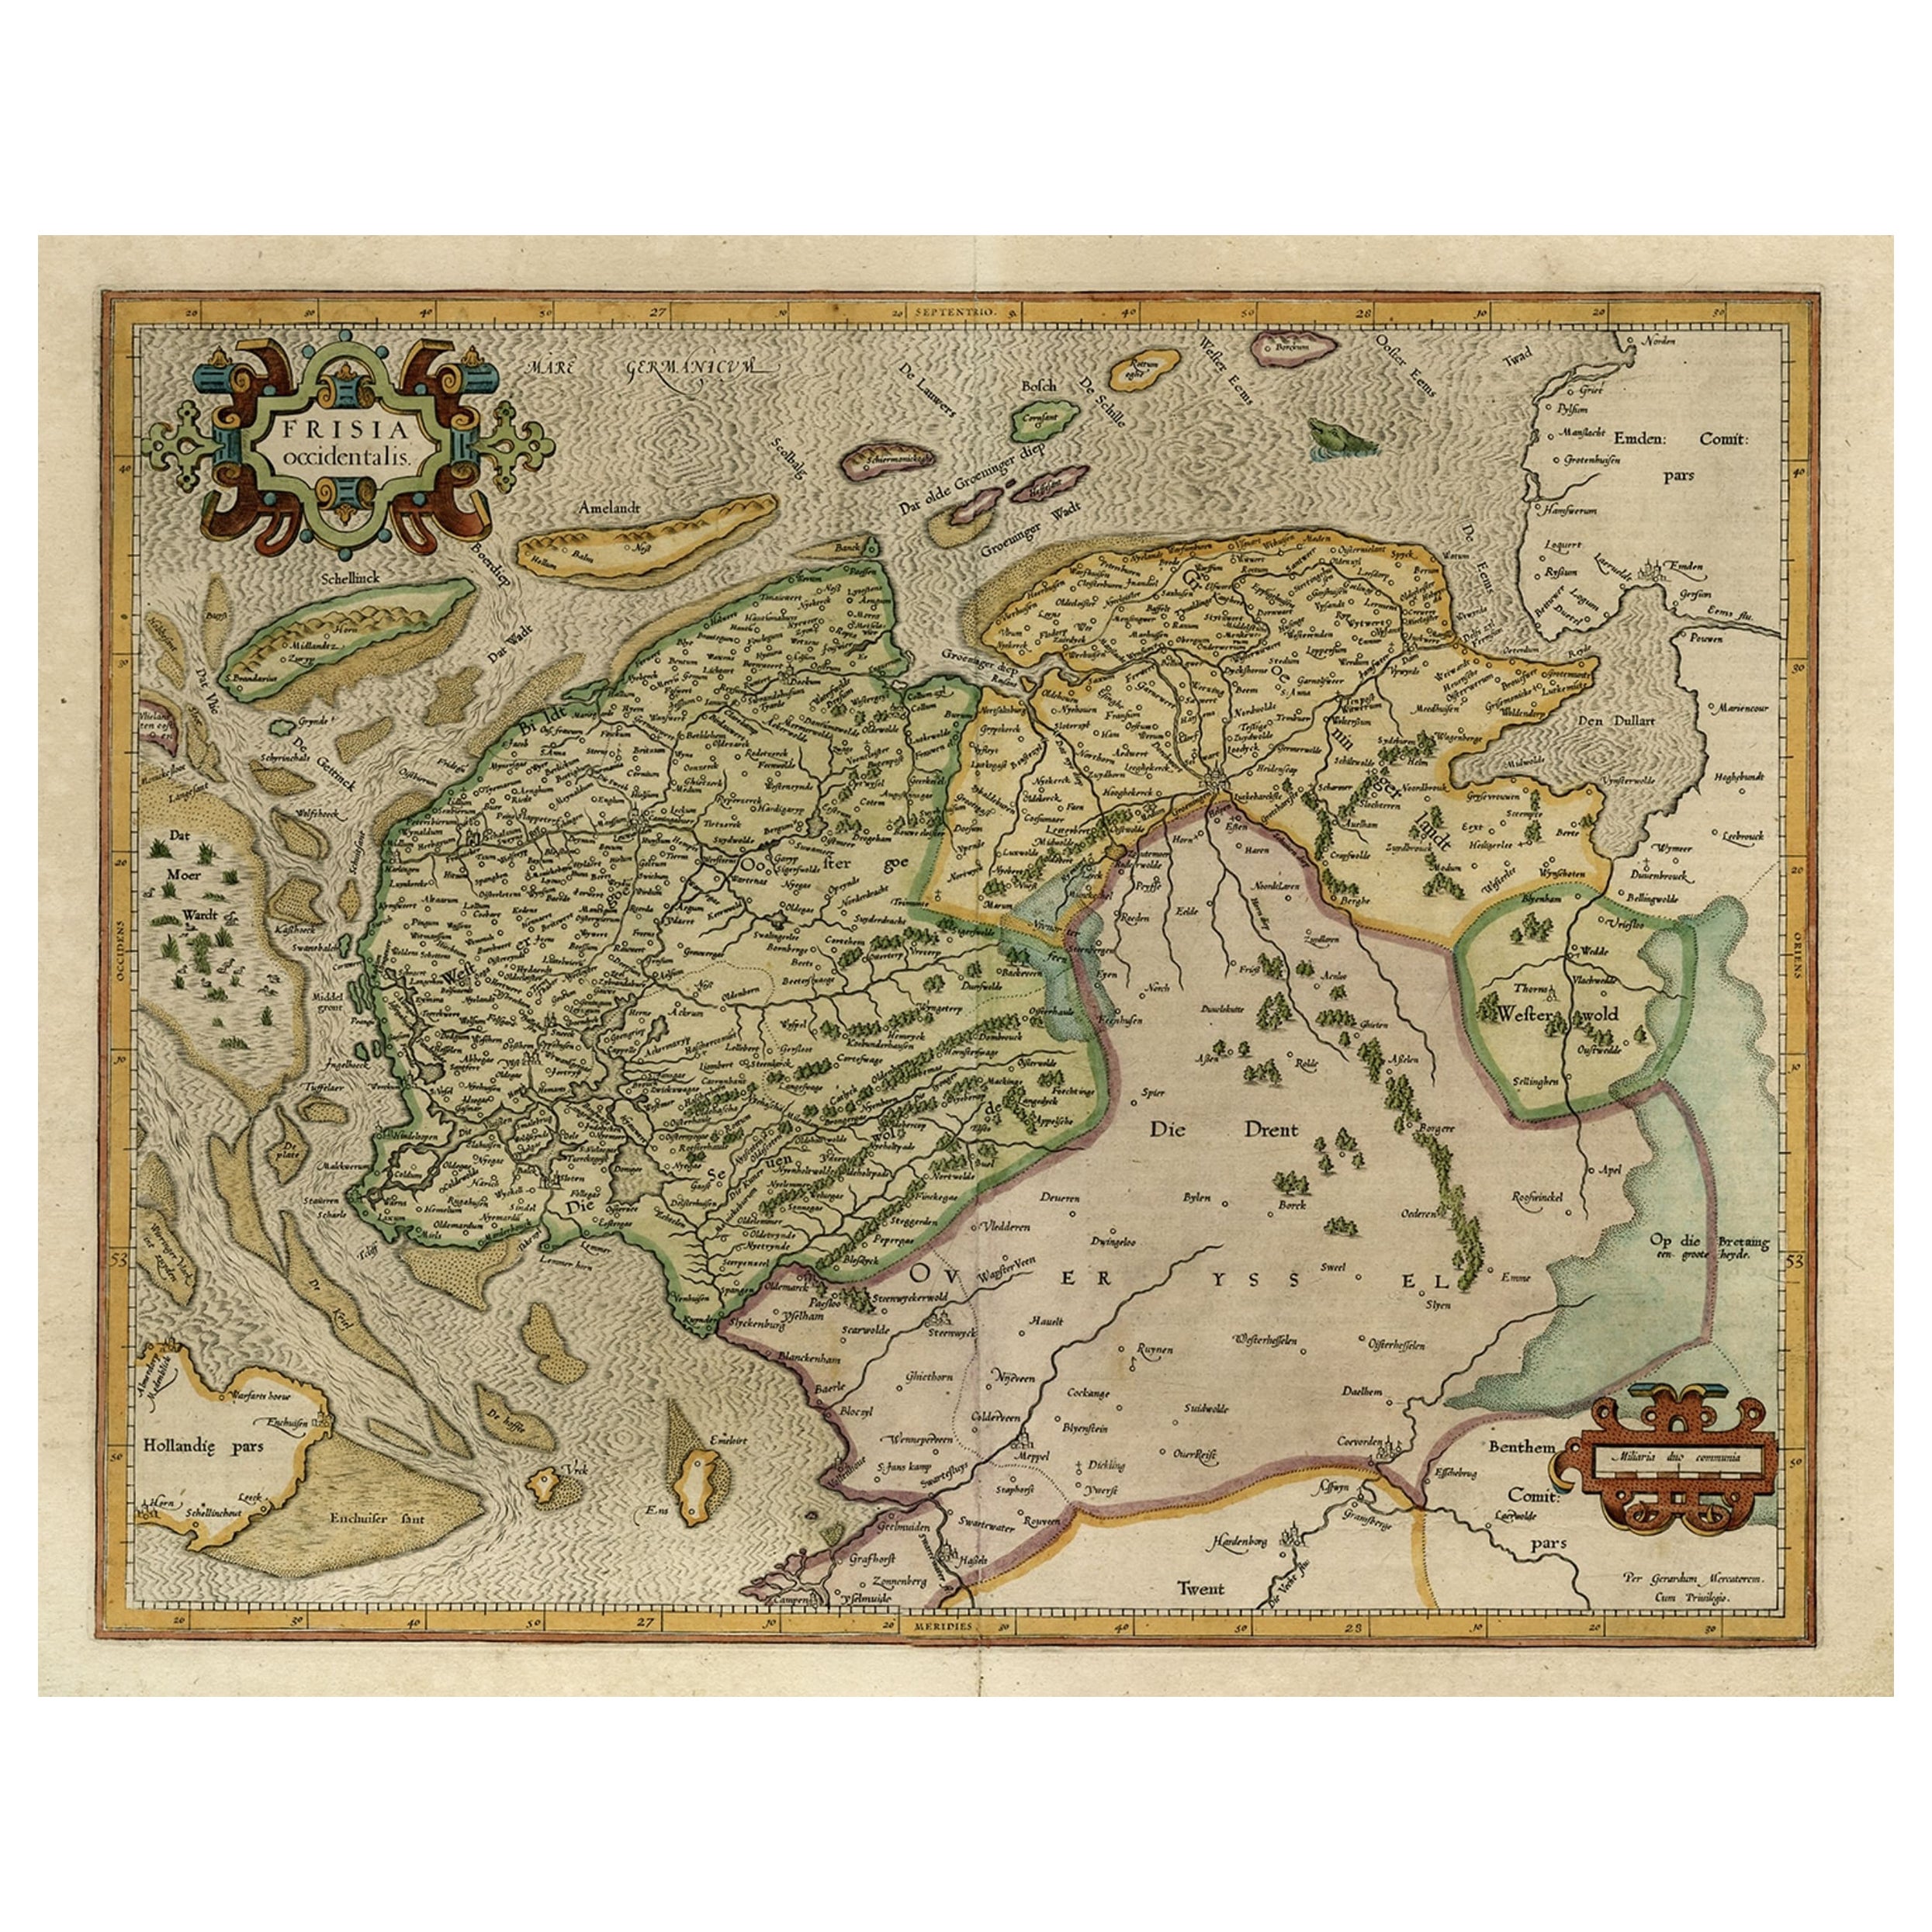 Old Map of the Dutch Provinces of Friesland and Groningen, The Netherlands, 1604 For Sale